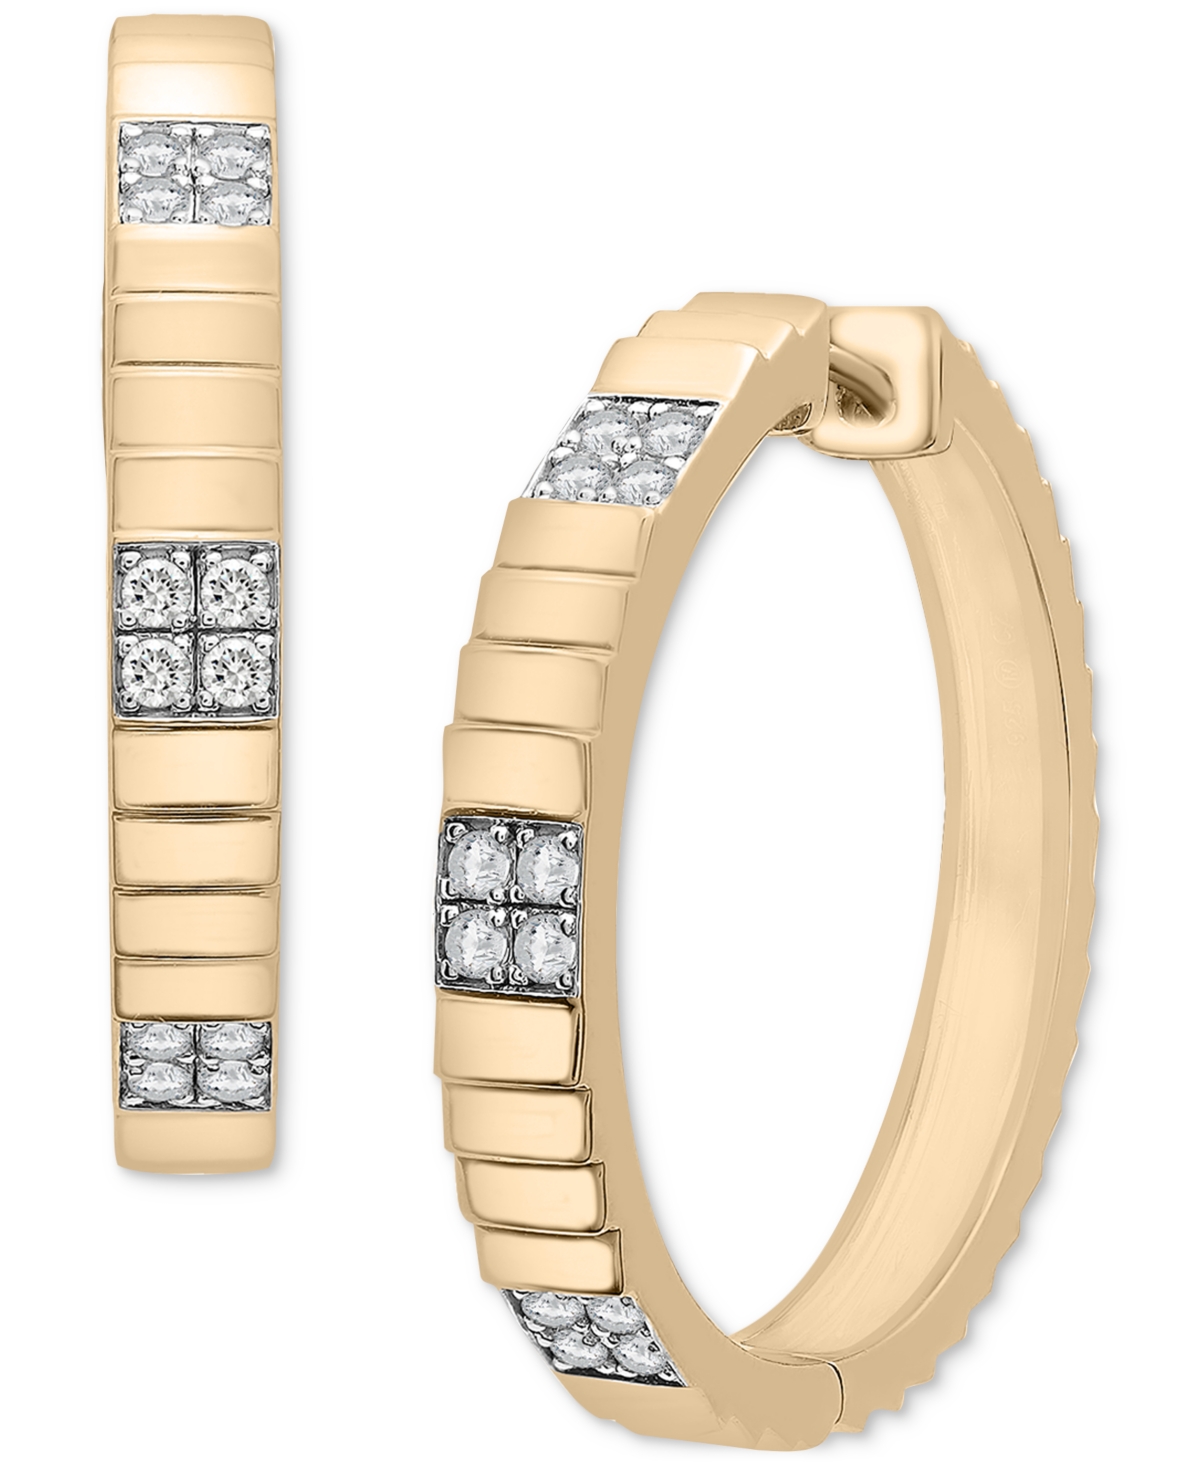 Diamond Textured Infinity Small Hoop Earrings (1/4 ct. t.w.) in Gold Vermeil, Created for Macy's - Gold Vermeil